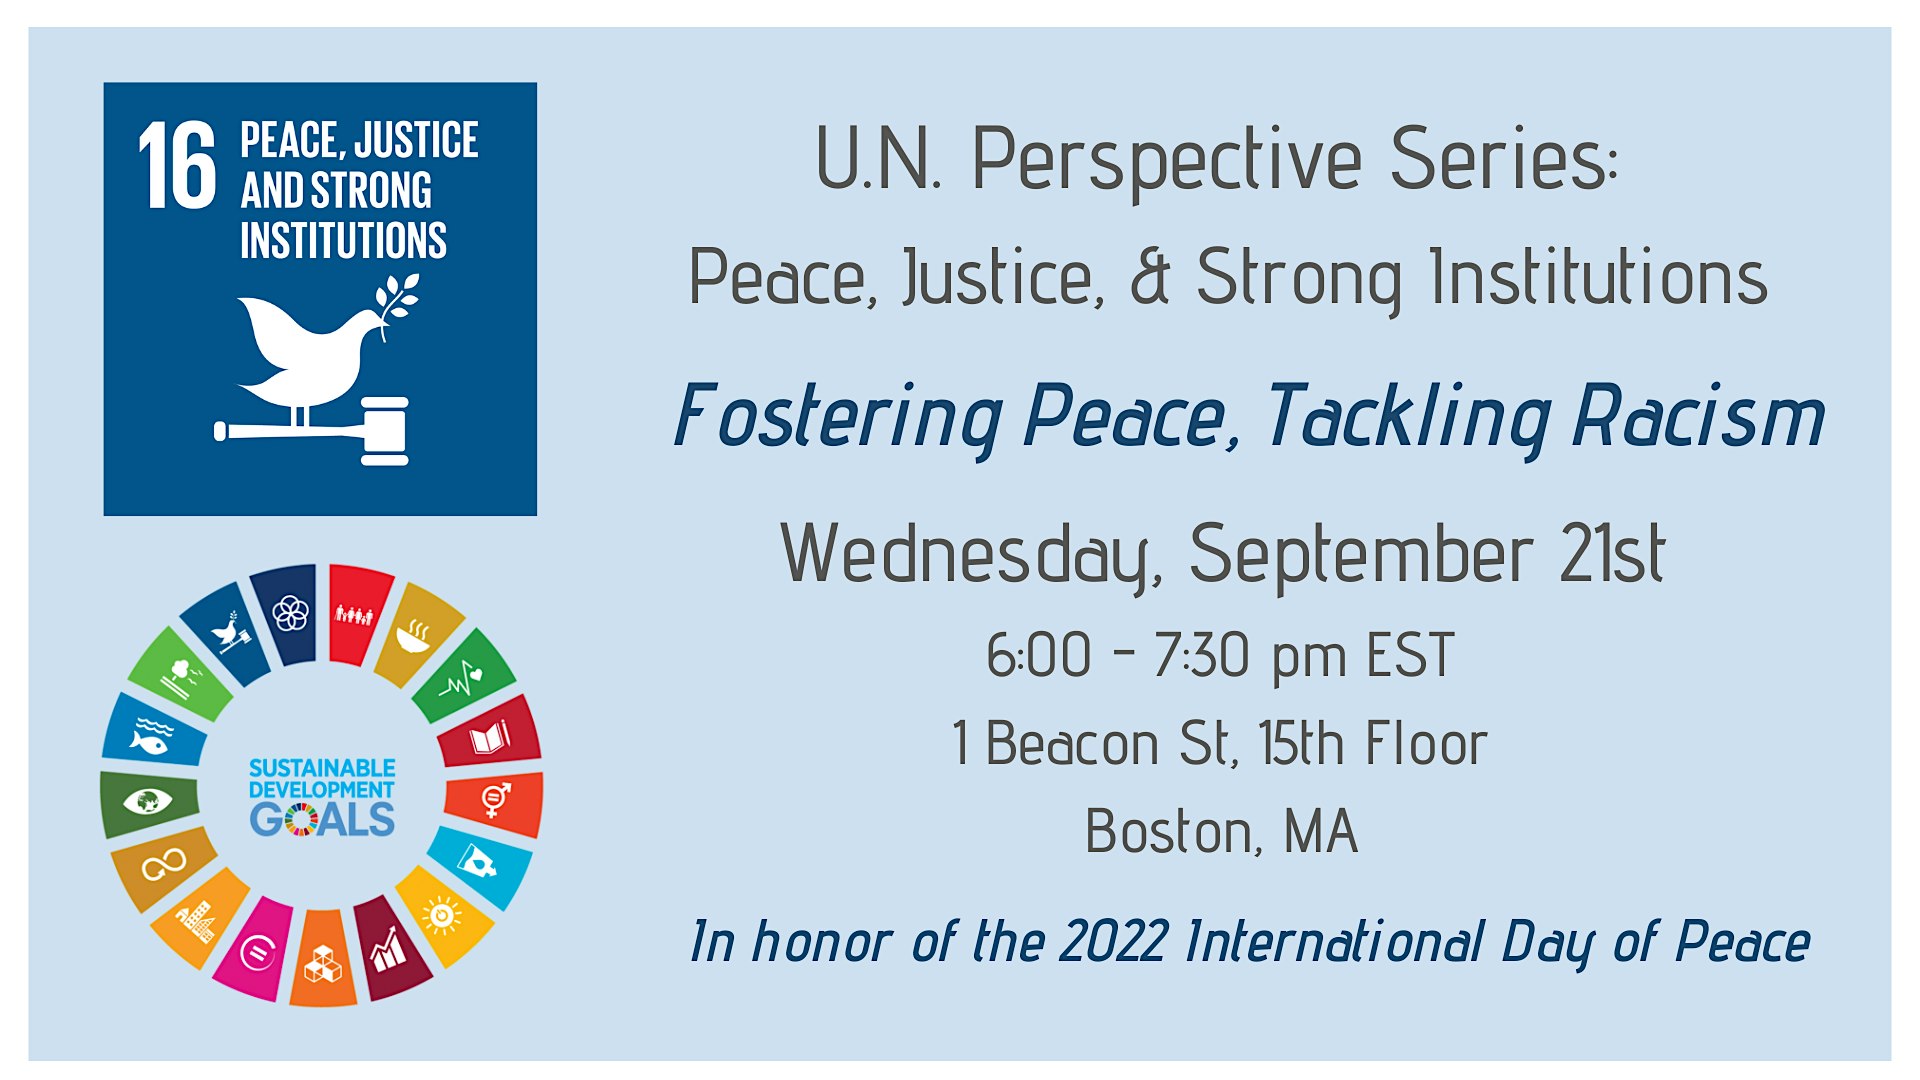 U.N. Perspective Series: Peace, Justice, and Strong Institutions